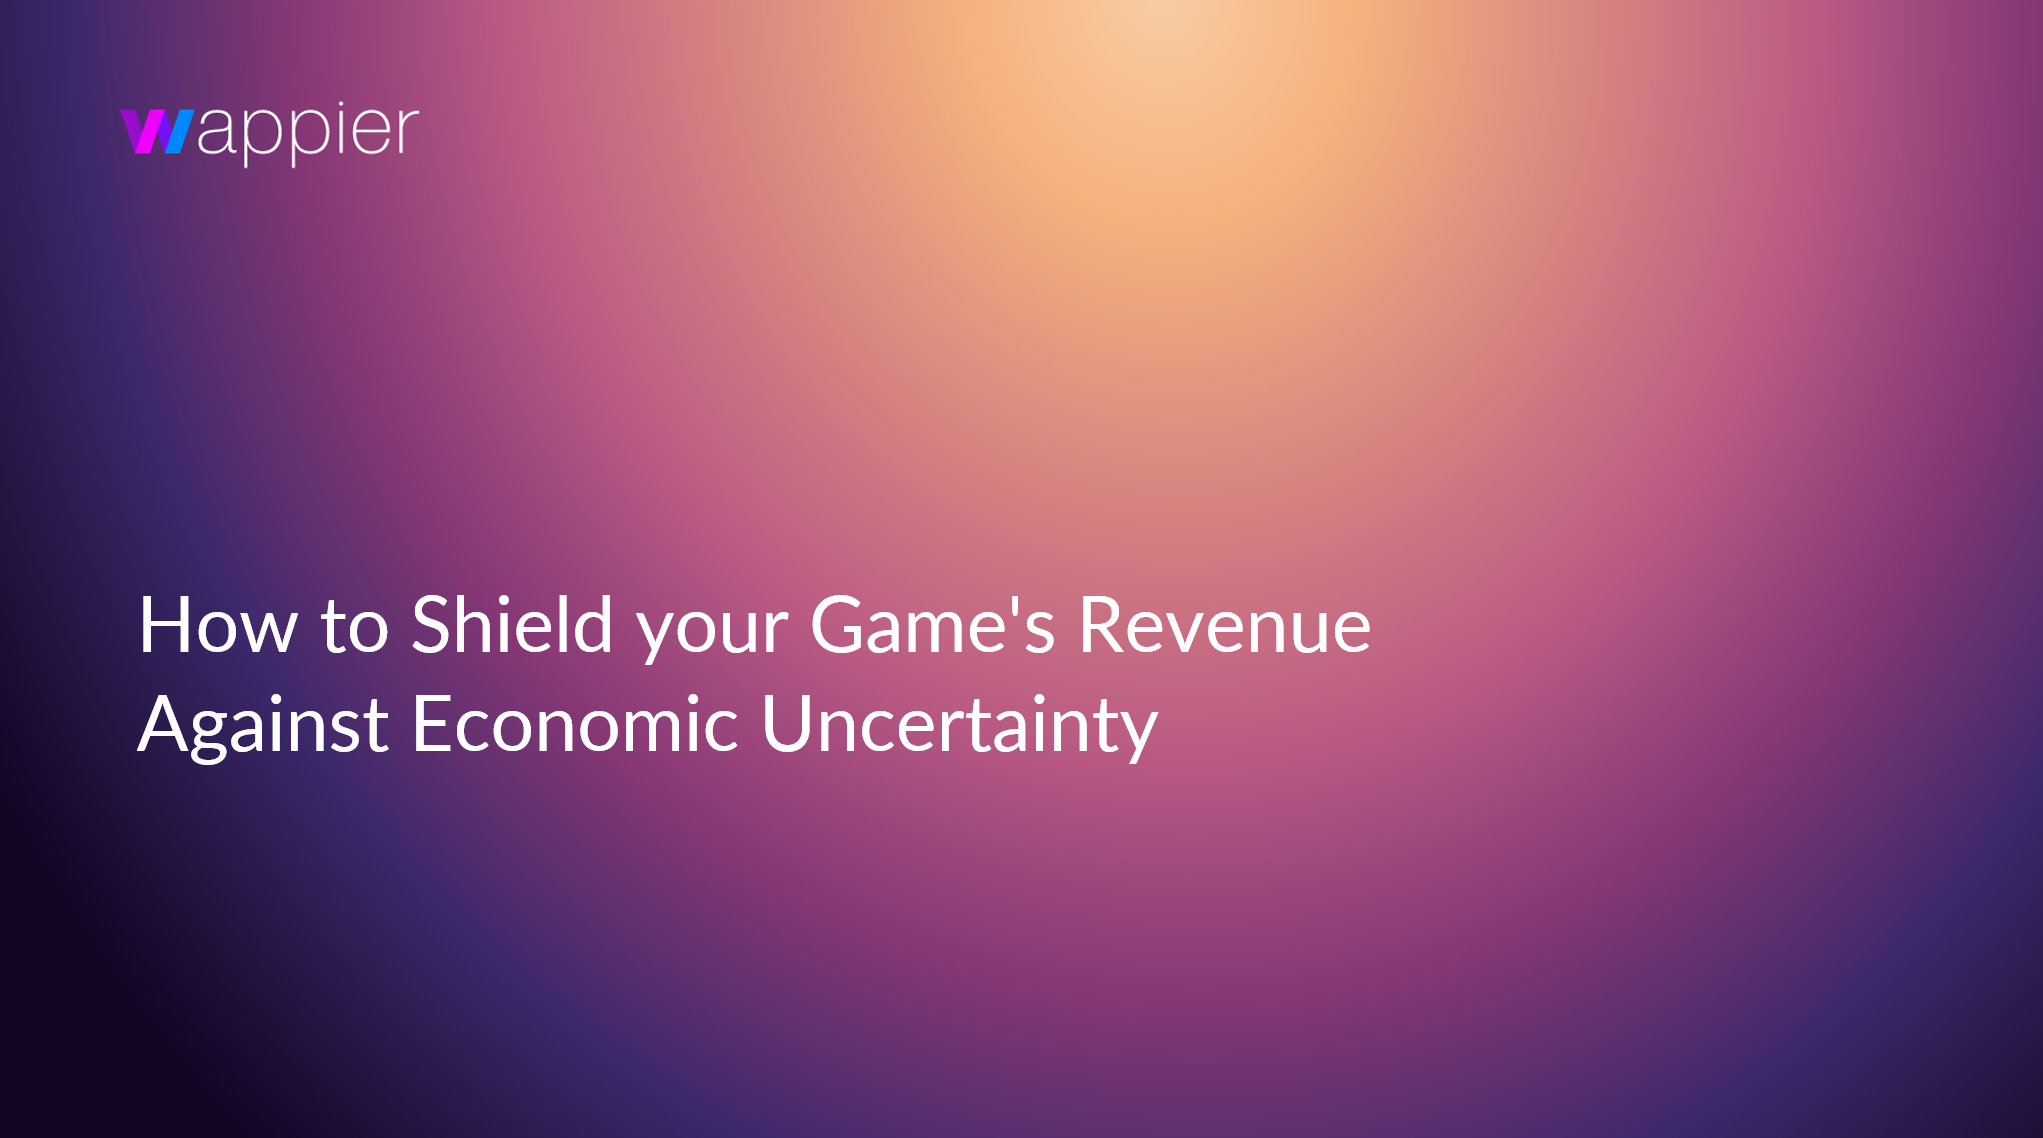 Image for the wappier blogpost with the title "How to Shield your Game's Revenue Against Economic Uncertainty"